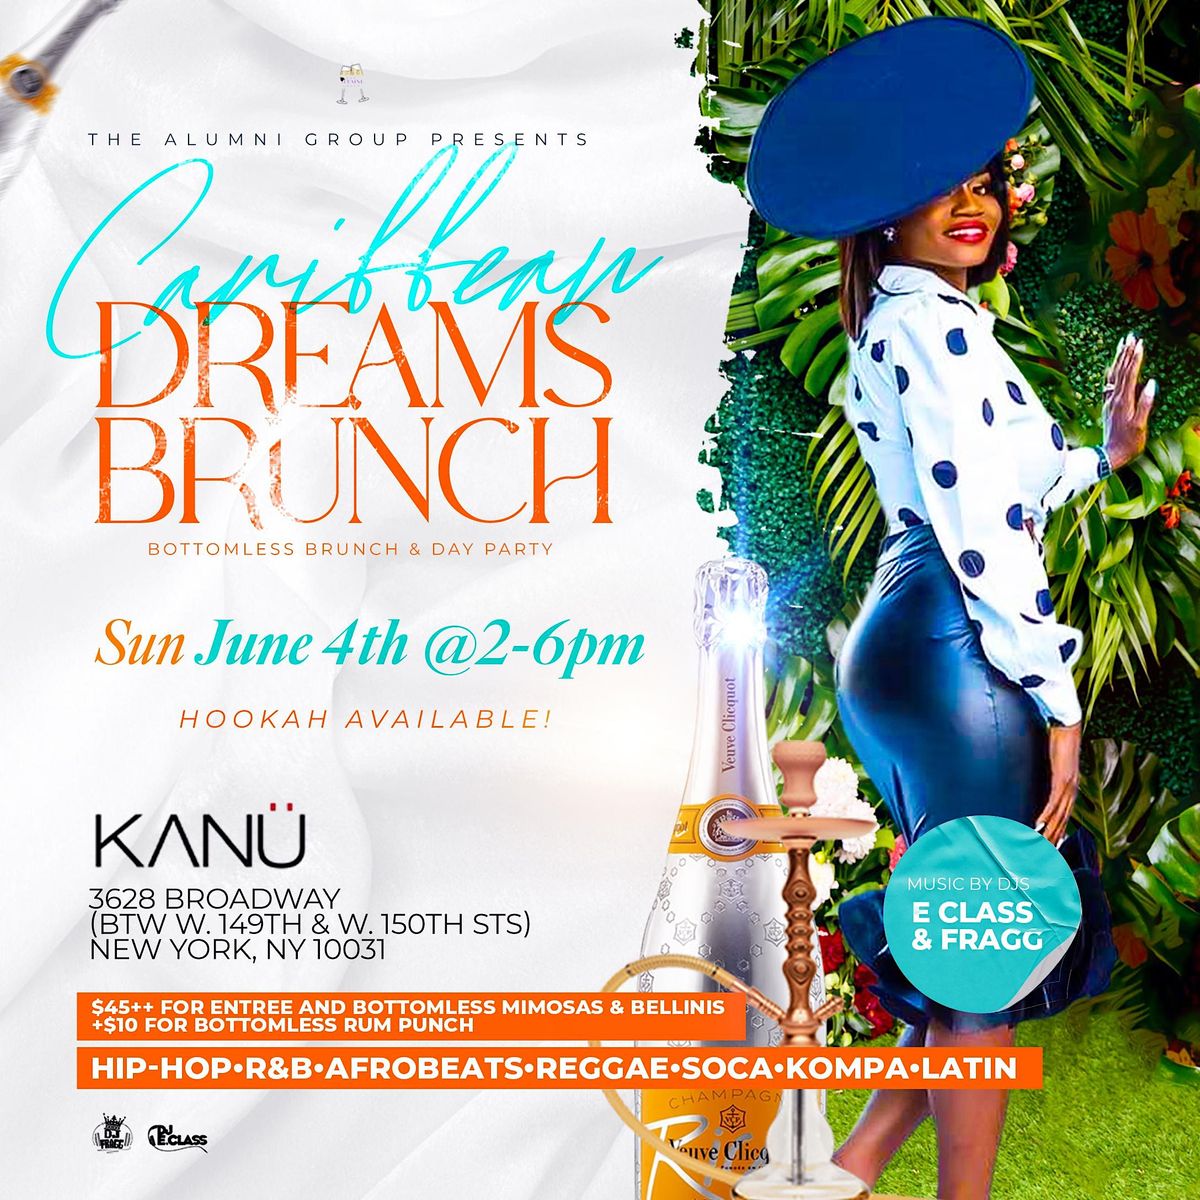 Caribbean Dreams - Bottomless Brunch & Day Party - Polo Classic Weekend